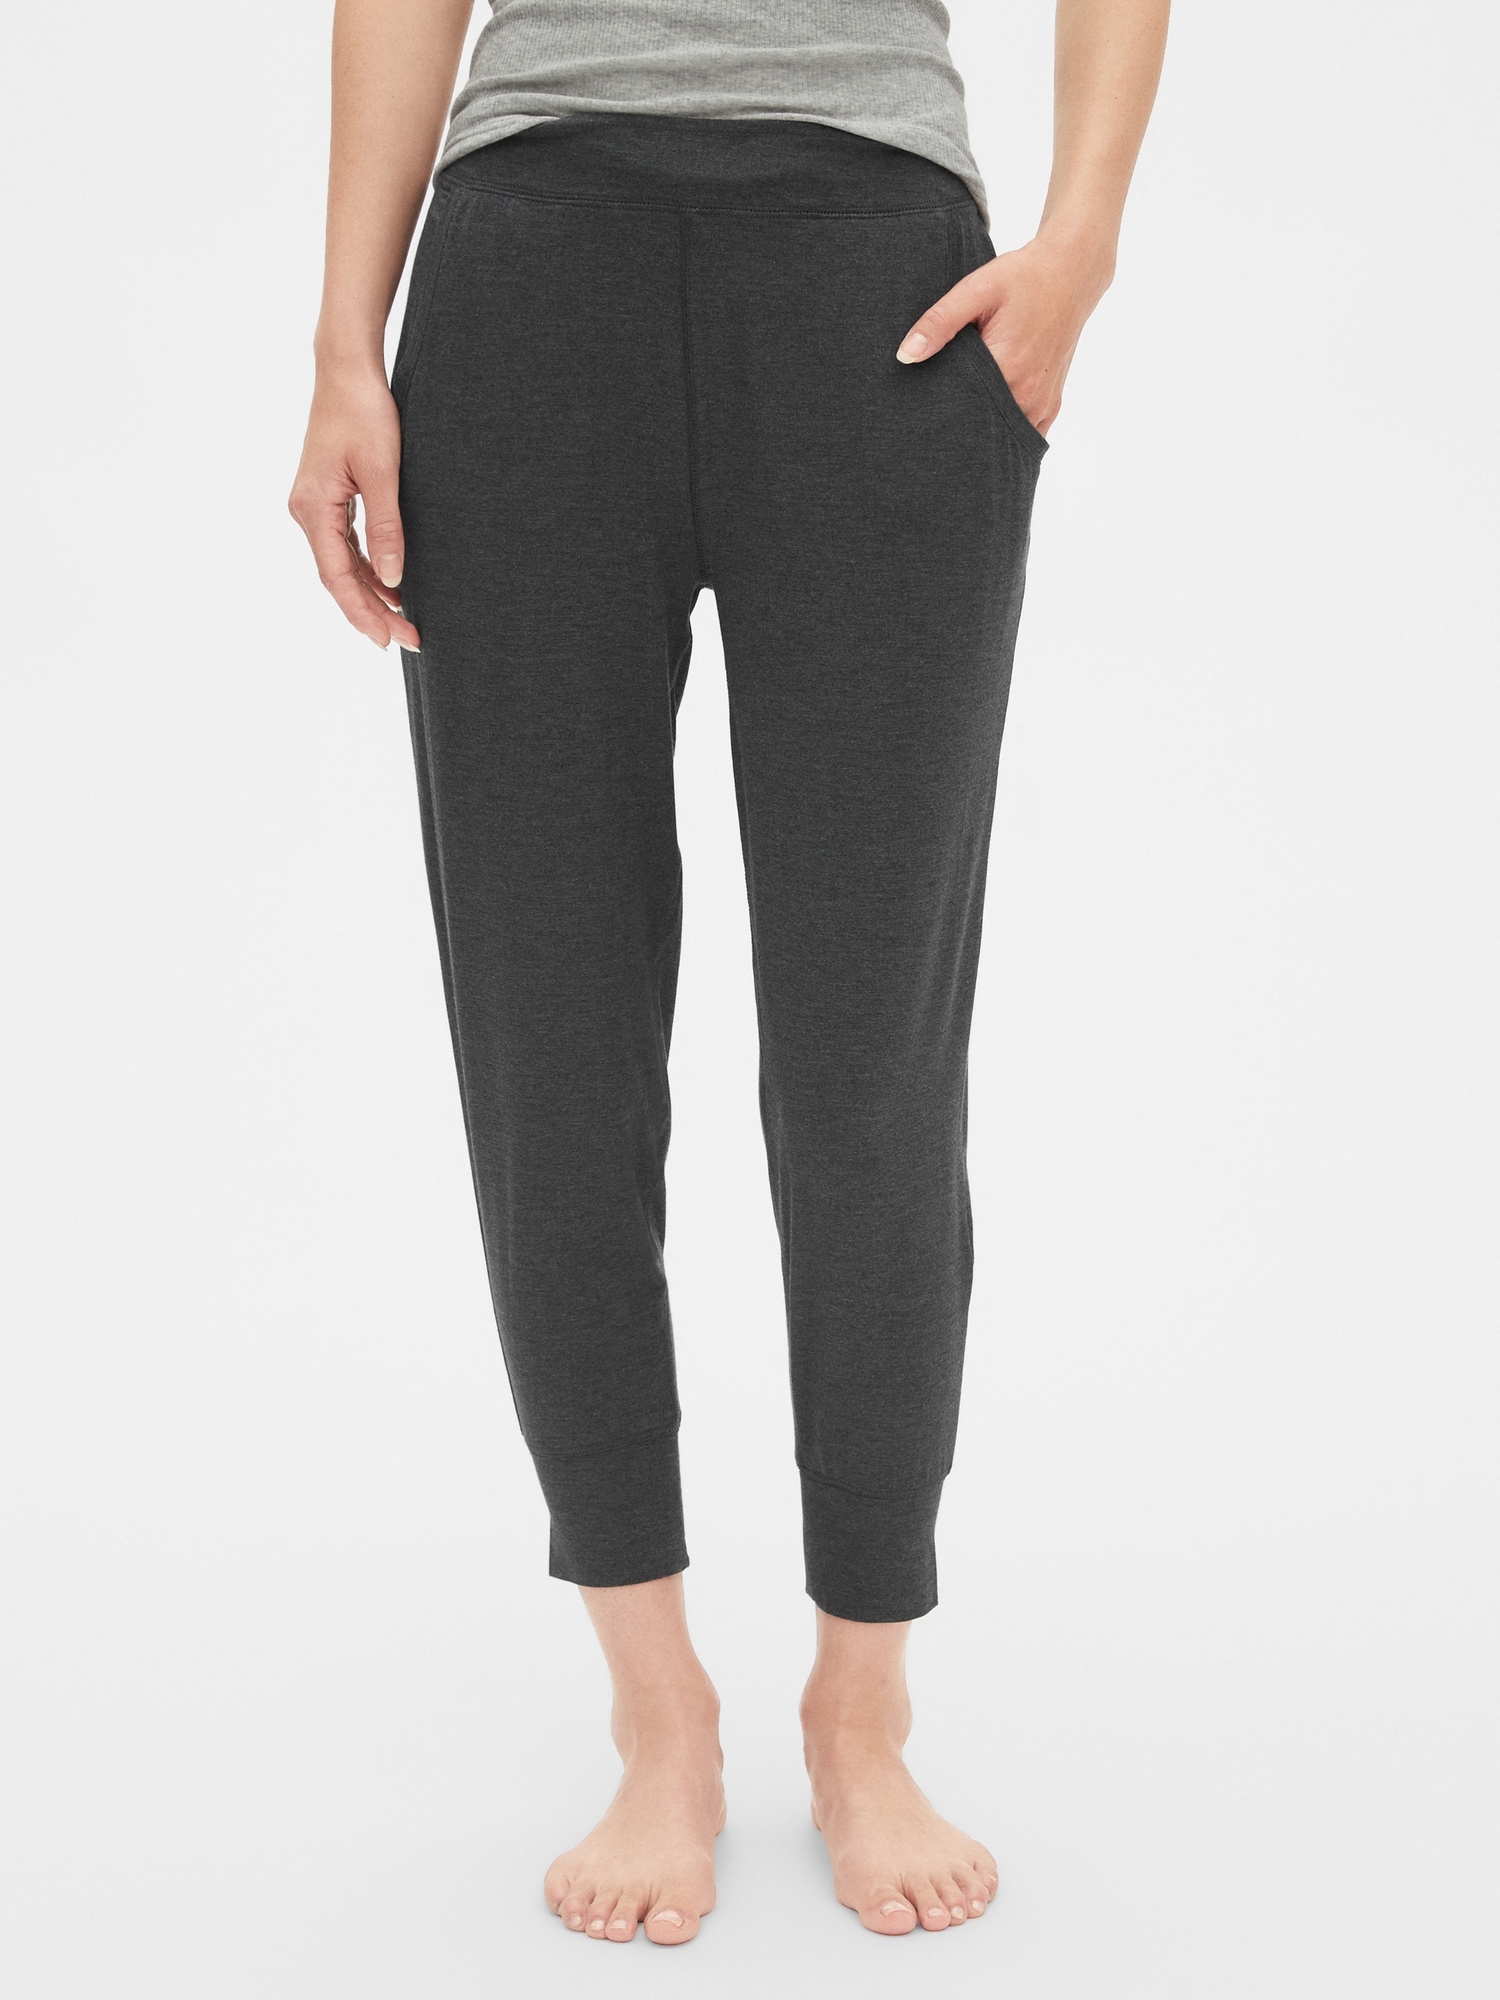 Pure Body Pants in Modal